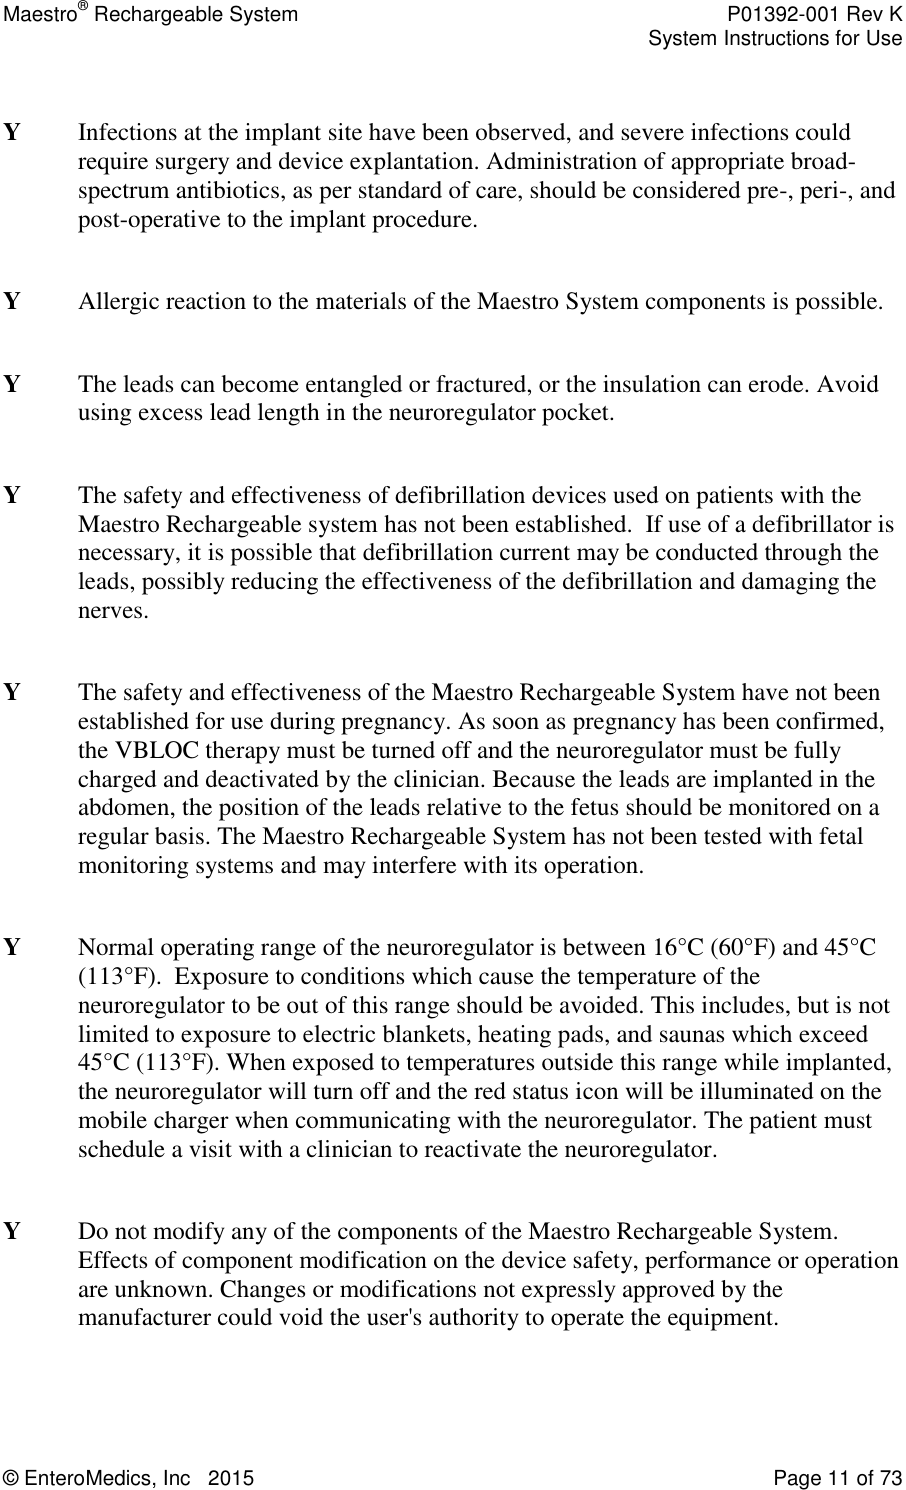 Maestro® Rechargeable System    P01392-001 Rev K     System Instructions for Use  © EnteroMedics, Inc   2015  Page 11 of 73    Y  Infections at the implant site have been observed, and severe infections could require surgery and device explantation. Administration of appropriate broad-spectrum antibiotics, as per standard of care, should be considered pre-, peri-, and post-operative to the implant procedure.  Y  Allergic reaction to the materials of the Maestro System components is possible.  Y  The leads can become entangled or fractured, or the insulation can erode. Avoid using excess lead length in the neuroregulator pocket.  Y  The safety and effectiveness of defibrillation devices used on patients with the Maestro Rechargeable system has not been established.  If use of a defibrillator is necessary, it is possible that defibrillation current may be conducted through the leads, possibly reducing the effectiveness of the defibrillation and damaging the nerves.  Y  The safety and effectiveness of the Maestro Rechargeable System have not been established for use during pregnancy. As soon as pregnancy has been confirmed, the VBLOC therapy must be turned off and the neuroregulator must be fully charged and deactivated by the clinician. Because the leads are implanted in the abdomen, the position of the leads relative to the fetus should be monitored on a regular basis. The Maestro Rechargeable System has not been tested with fetal monitoring systems and may interfere with its operation.     Y   Normal operating range of the neuroregulator is between 16°C (60°F) and 45°C (113°F).  Exposure to conditions which cause the temperature of the neuroregulator to be out of this range should be avoided. This includes, but is not limited to exposure to electric blankets, heating pads, and saunas which exceed 45°C (113°F). When exposed to temperatures outside this range while implanted, the neuroregulator will turn off and the red status icon will be illuminated on the mobile charger when communicating with the neuroregulator. The patient must schedule a visit with a clinician to reactivate the neuroregulator.   Y  Do not modify any of the components of the Maestro Rechargeable System.  Effects of component modification on the device safety, performance or operation are unknown. Changes or modifications not expressly approved by the manufacturer could void the user&apos;s authority to operate the equipment.  